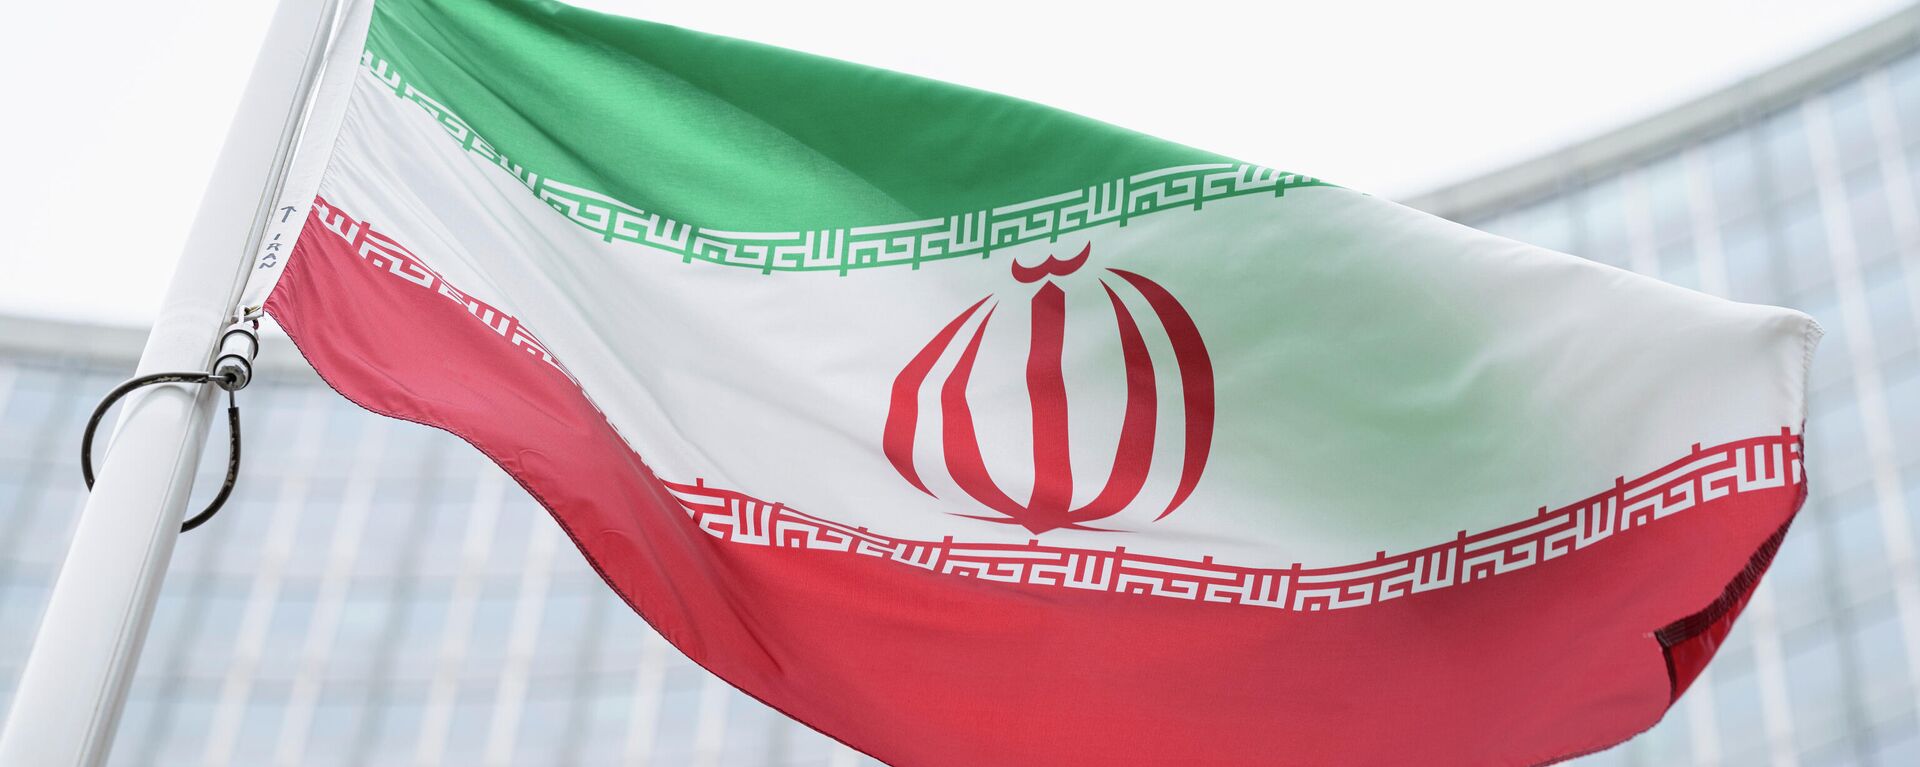 FILE - The flag of Iran waves in front of the the International Center building with the headquarters of the International Atomic Energy Agency, IAEA, in Vienna, AustriaI, May 24, 2021. On Monday, Nov. 29, 2021, negotiators are gathering in Vienna to resume efforts to revive Iran's 2015 nuclear deal with world powers, with hopes of quick progress muted after the arrival of a hard-line new government in Tehran led to a more than five-month hiatus. (AP Photo/Florian Schroetter, FILE) - Sputnik International, 1920, 01.05.2023